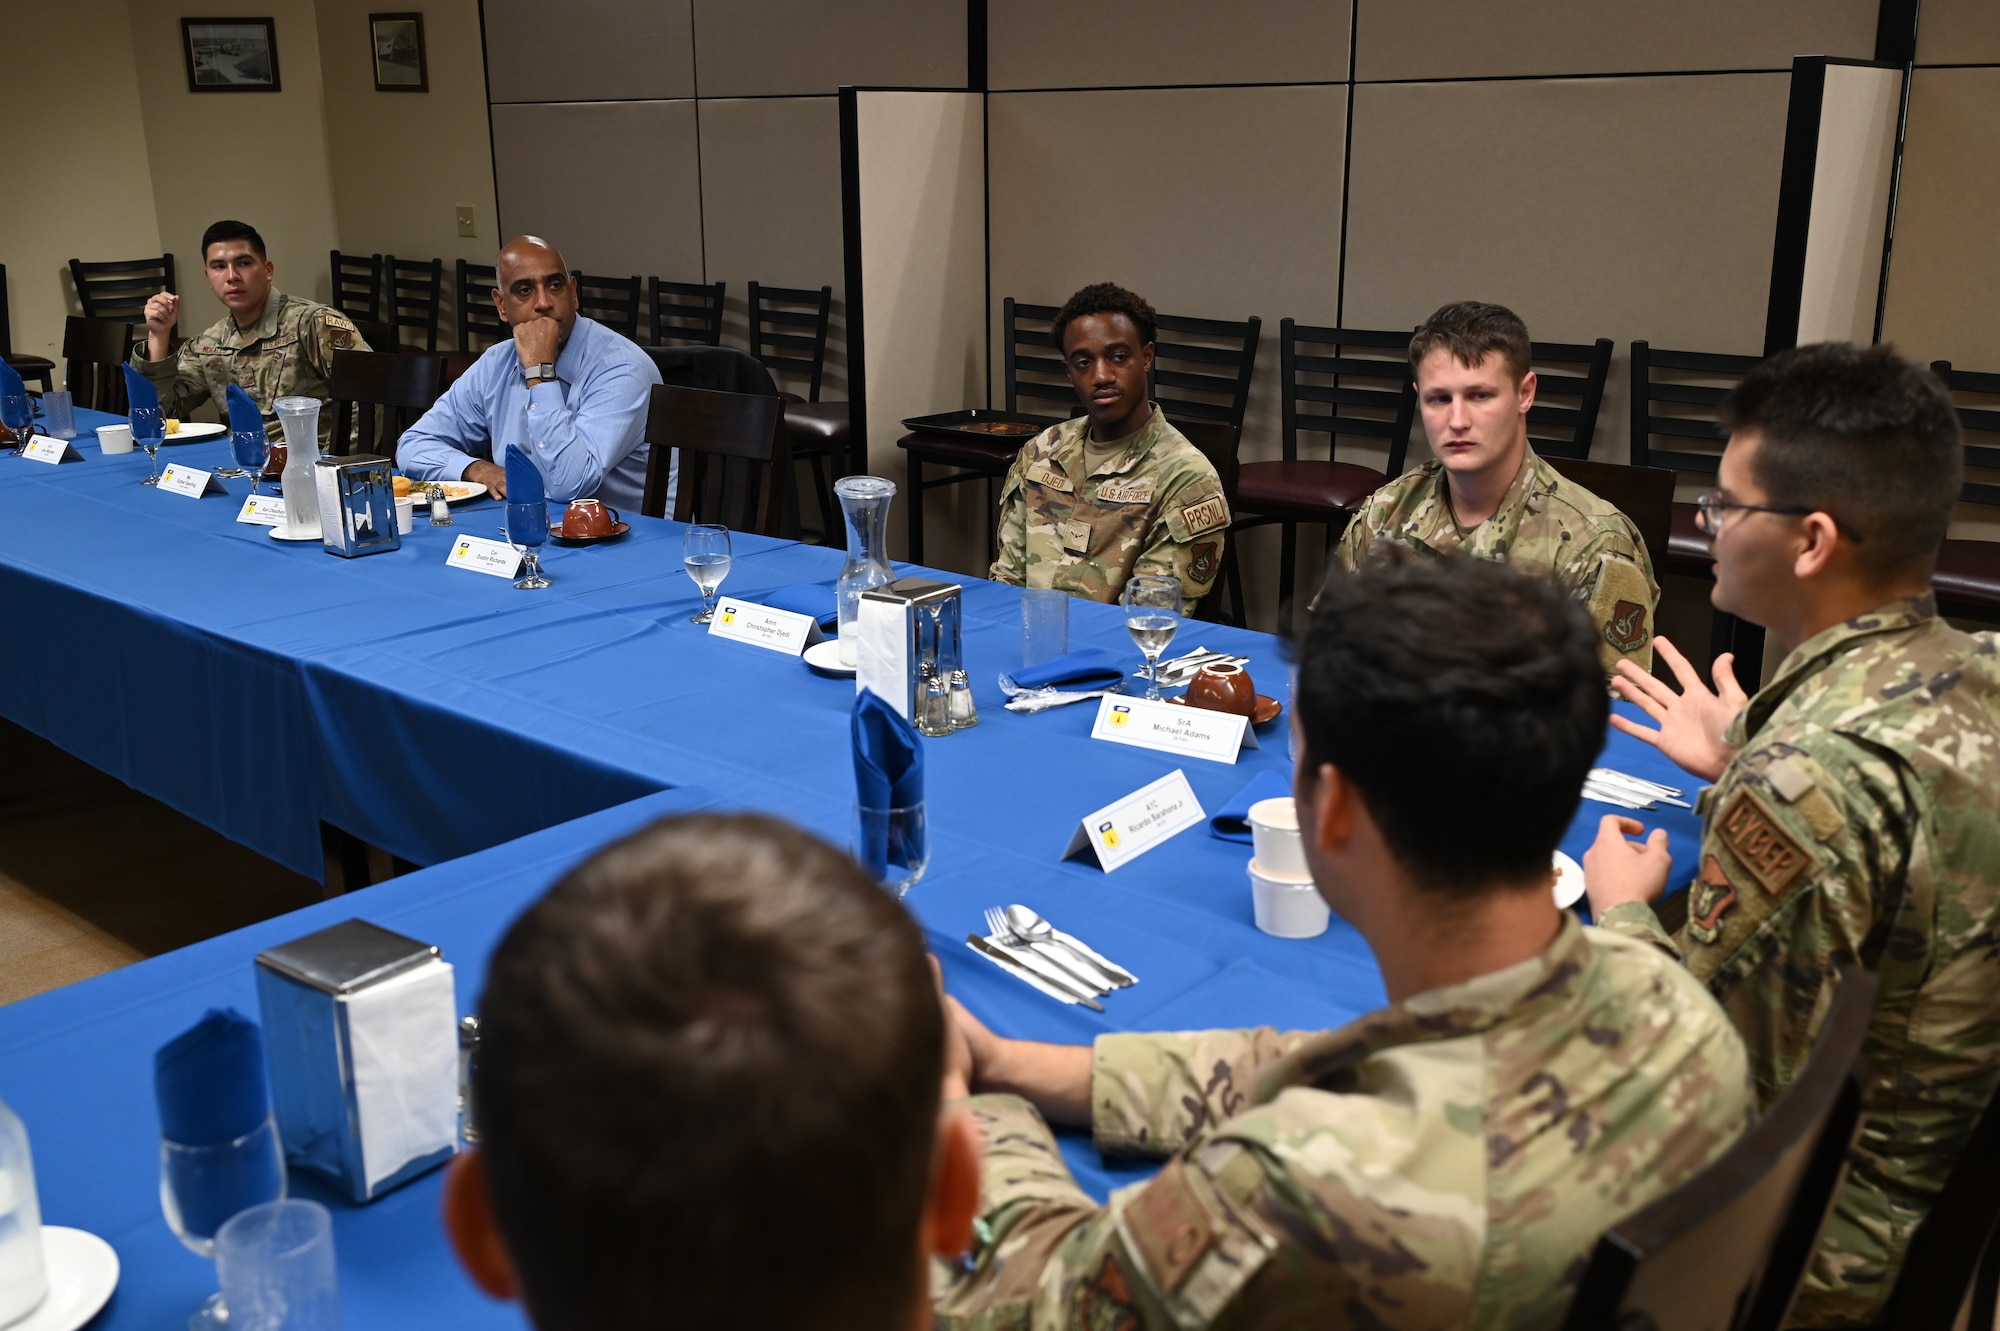 Dr. Ravi Chaudhary sits on a large lunch table with a group of Airmen and listens to their concerns.